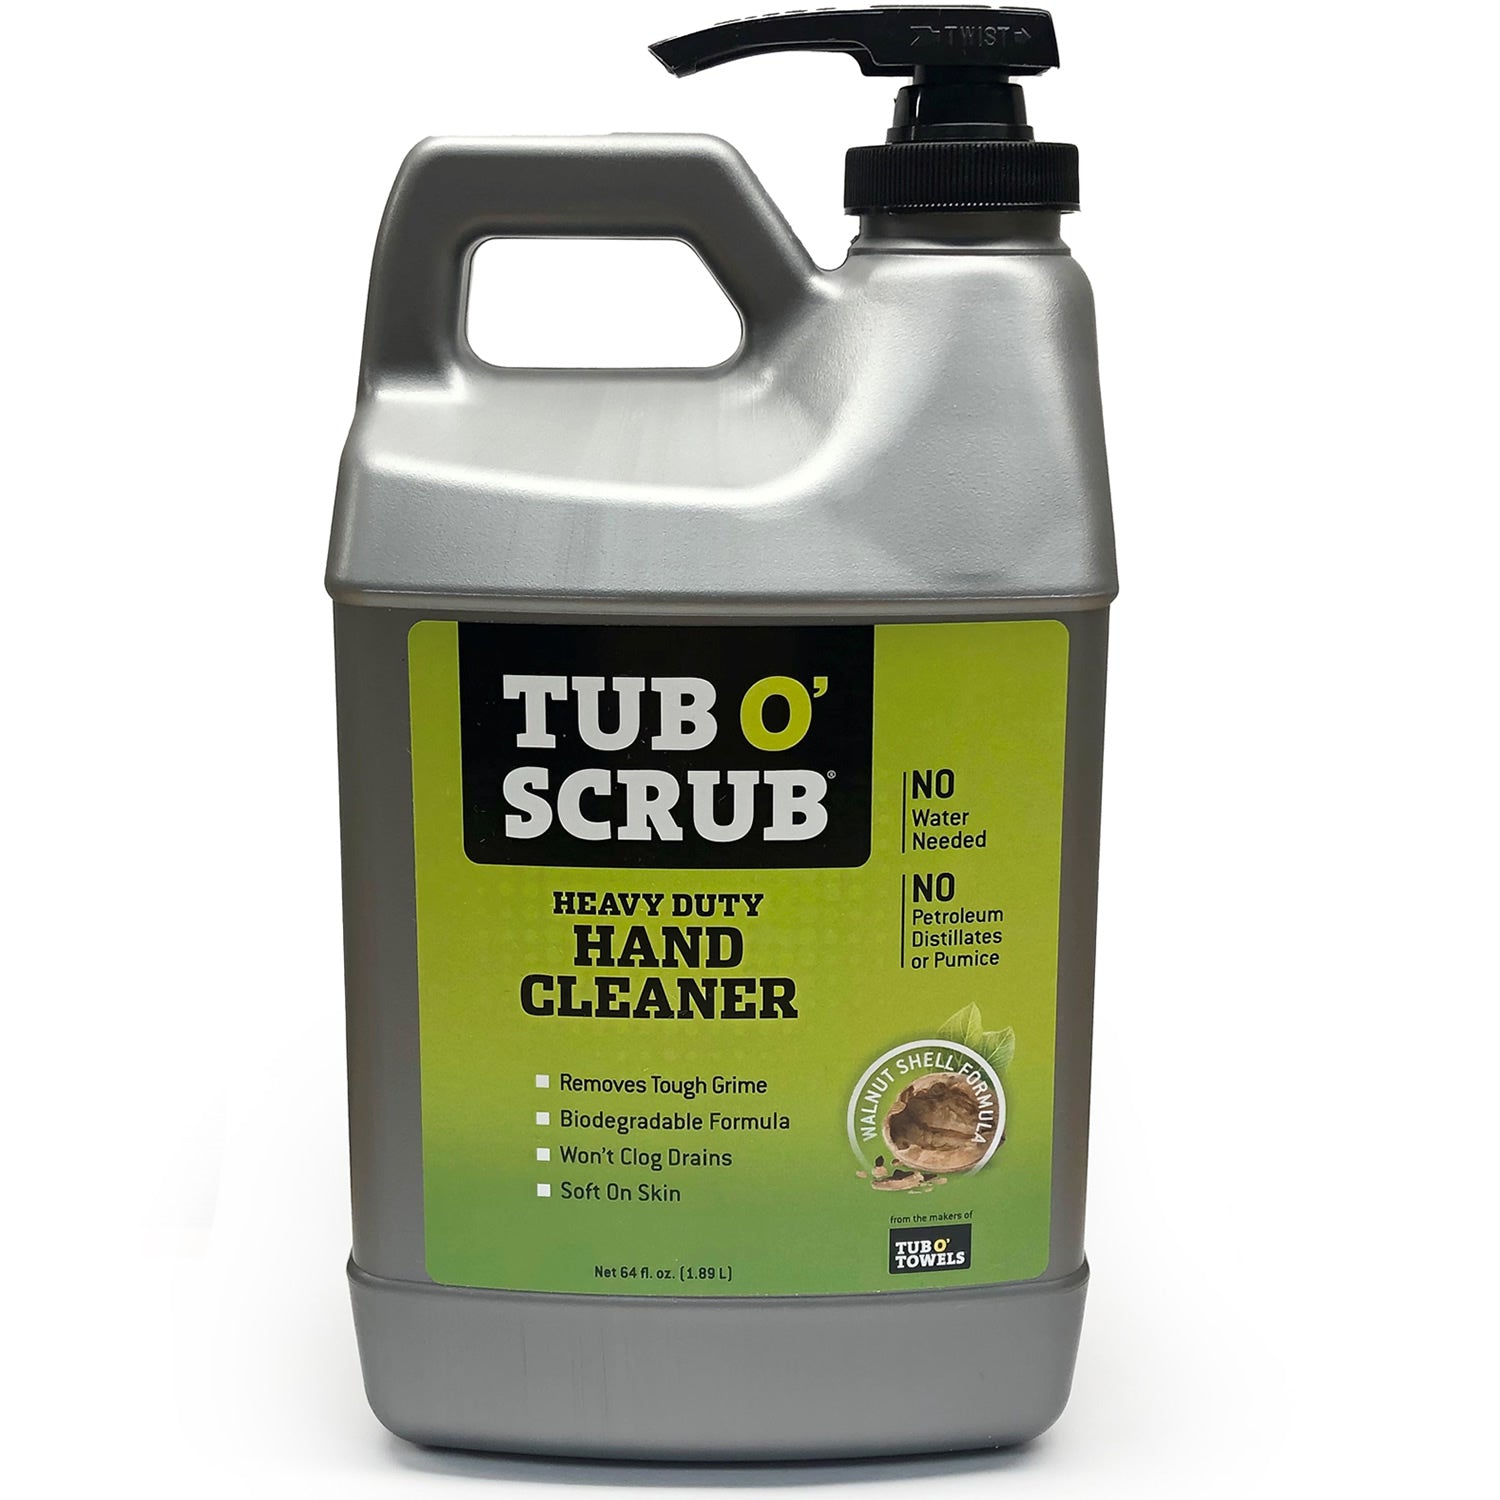 Tub O Towels TW01-15 + TS18 Hand Cleaner Heavy Duty Multi-Surface